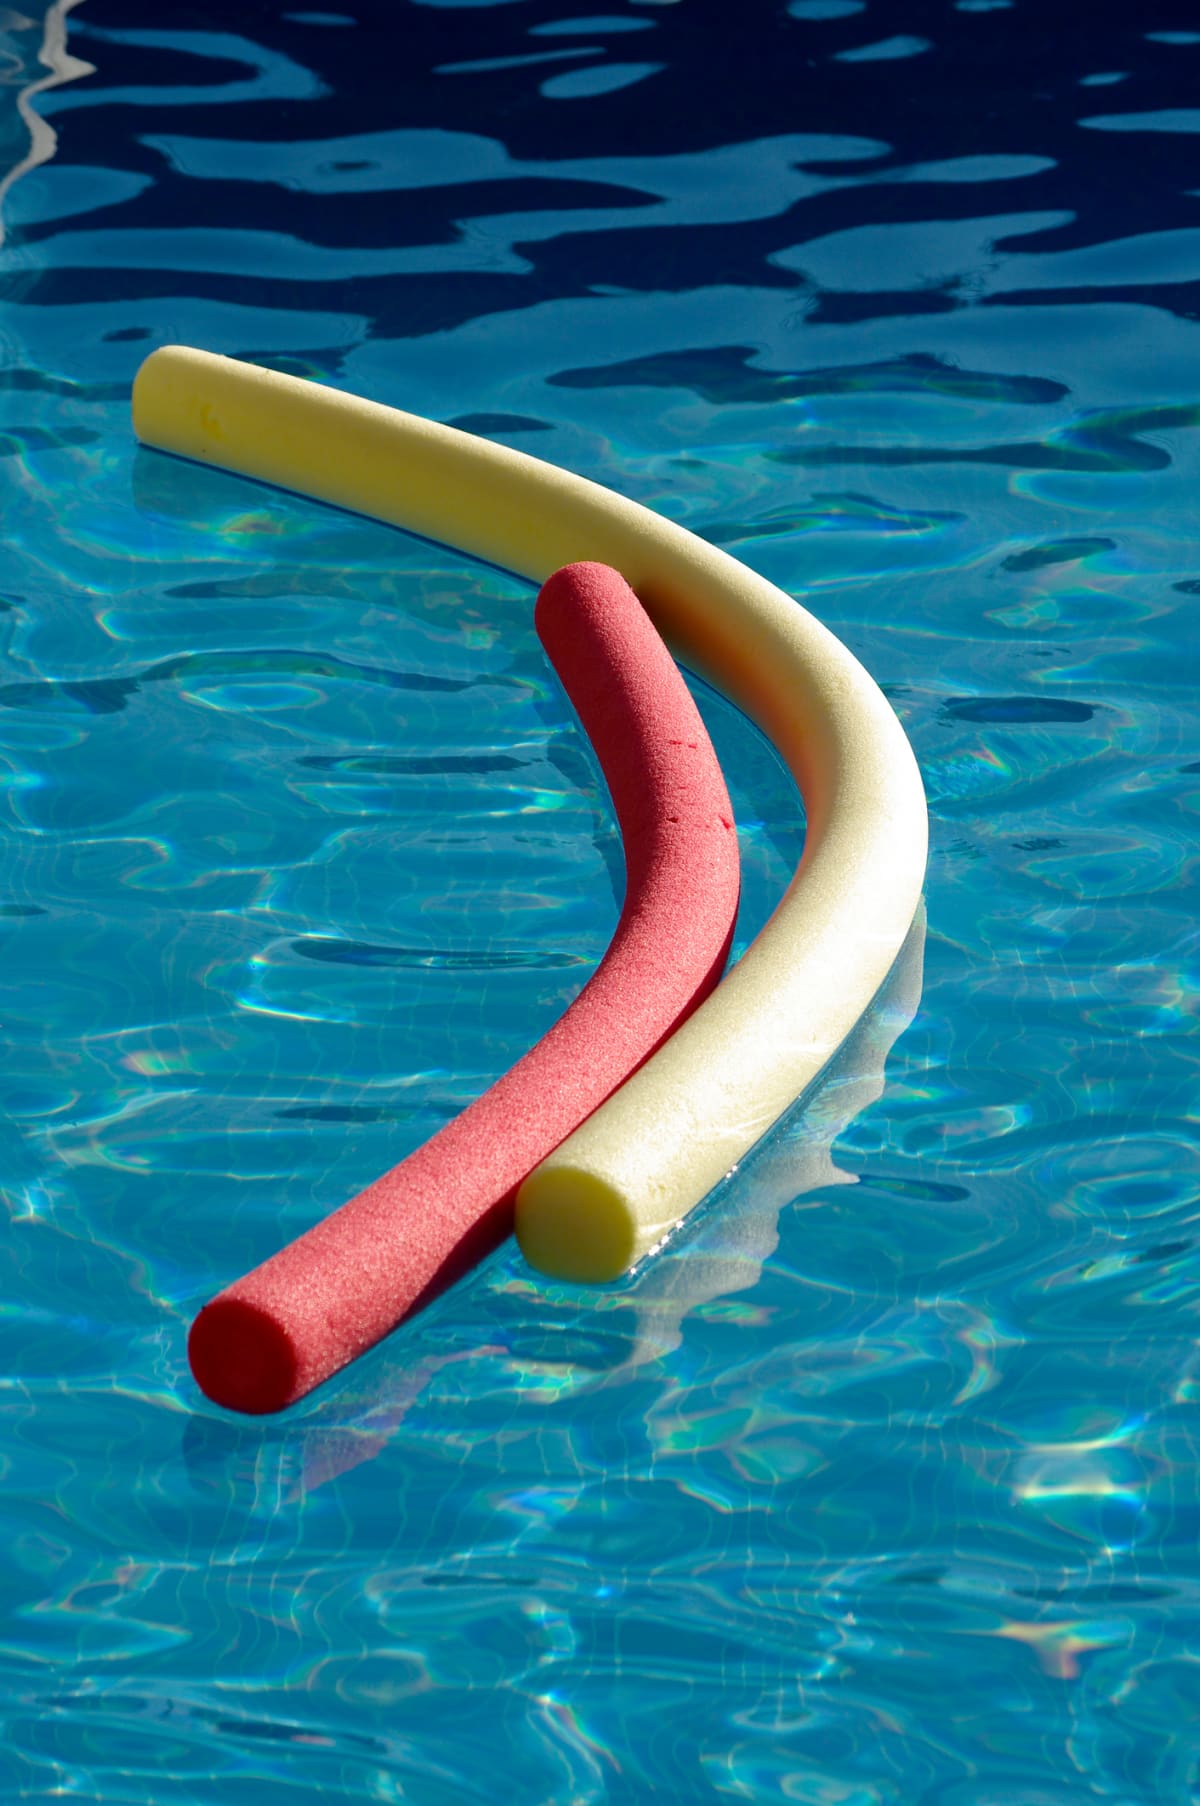 Yellow and red pool noodles (water logs) on pool in evening sunshine.